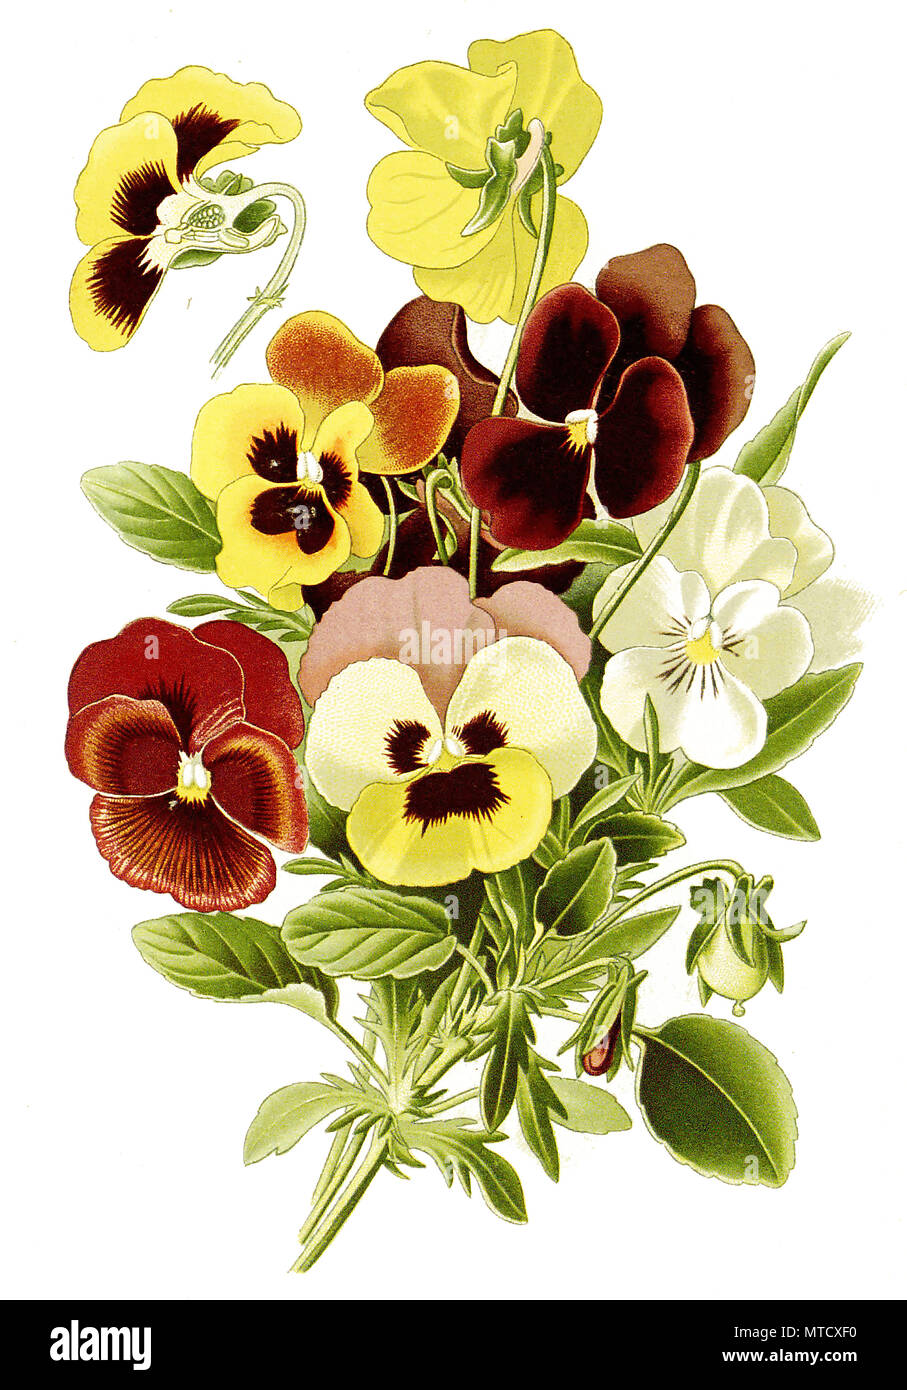 Viola tricolor, Pansy,  heartsease, heart's ease, heart's delight, tickle-my-fancy, Jack-jump-up-and-kiss-me, come-and-cuddle-me, three faces in a hood, or love-in-idleness. StiefmÃ¼tterchen, Ackerveilchen, Muttergottesschuh, MÃ¤dchenaugen, SchÃ¶ngesicht oder Liebesgesichtli, digital improved reproduction from a print of the 19th century Stock Photo